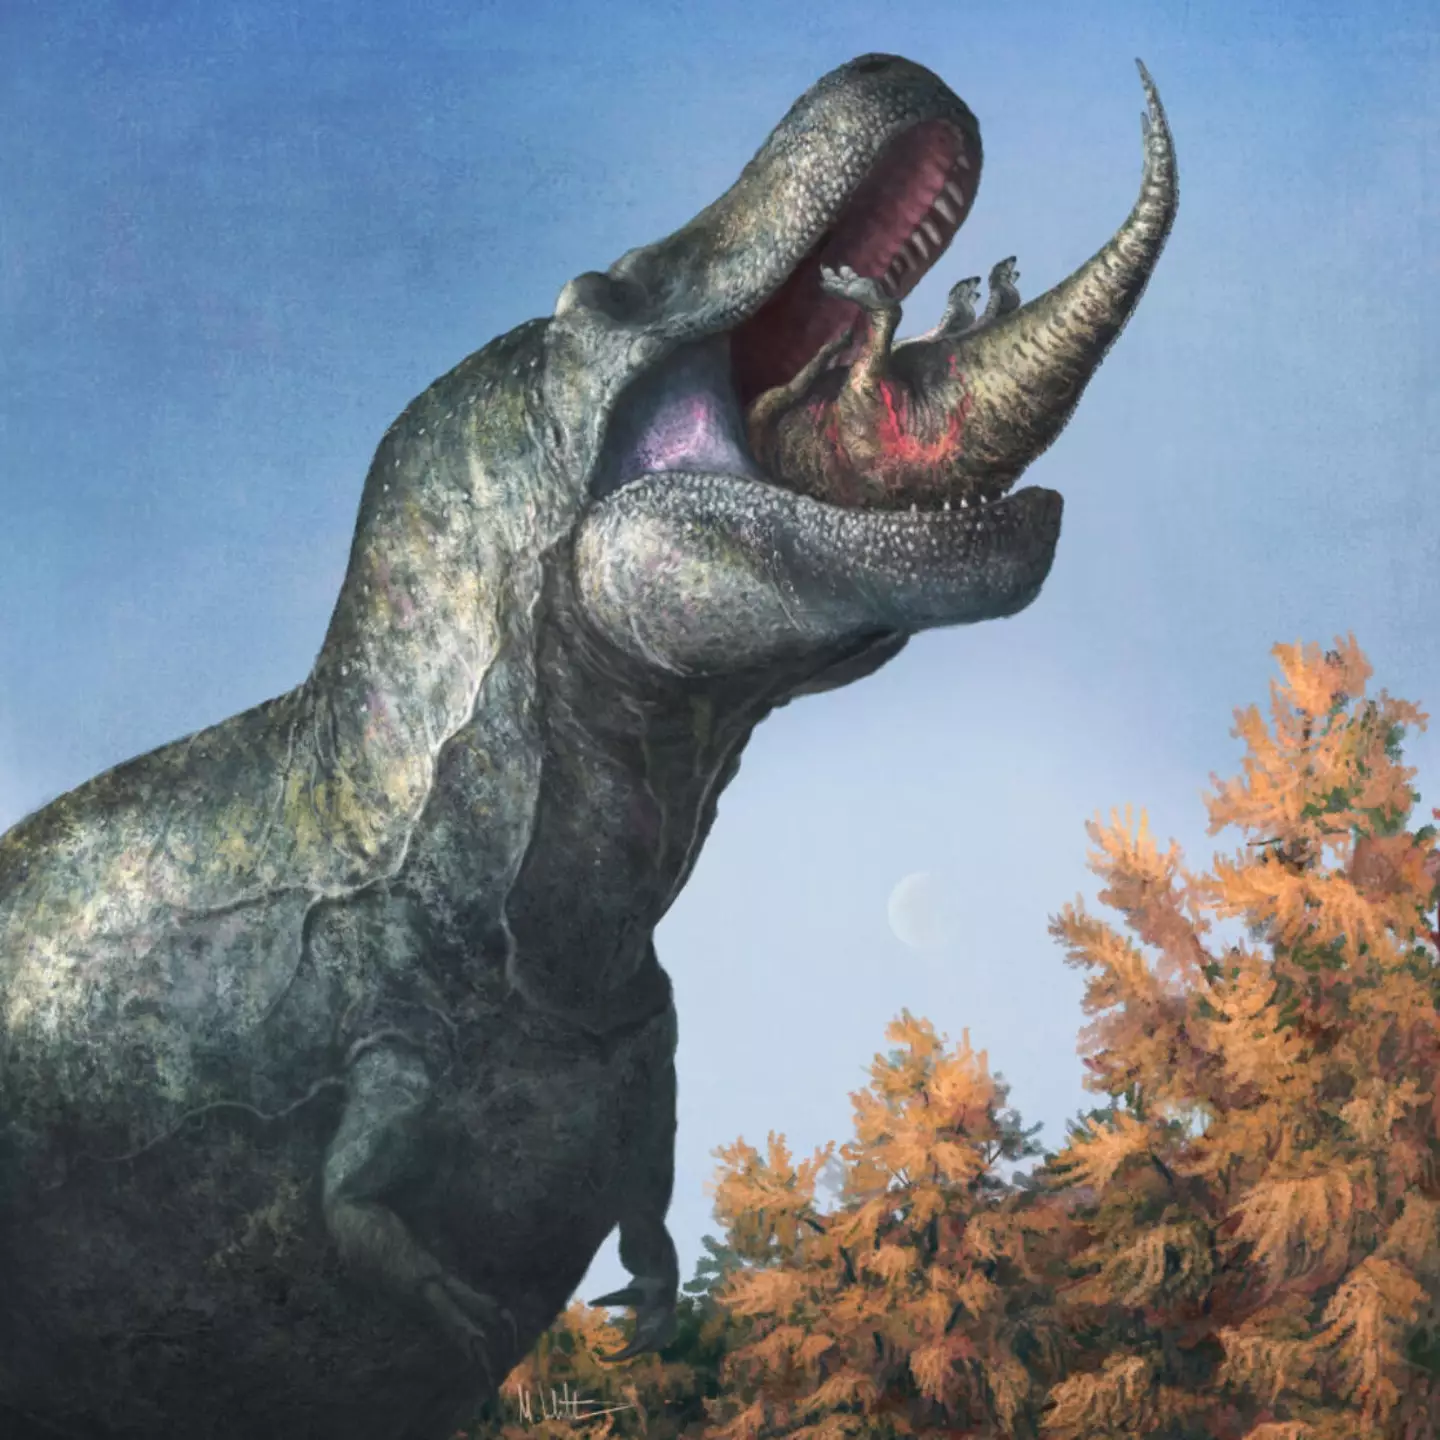 T-rexes might have just had regular sized teeth.